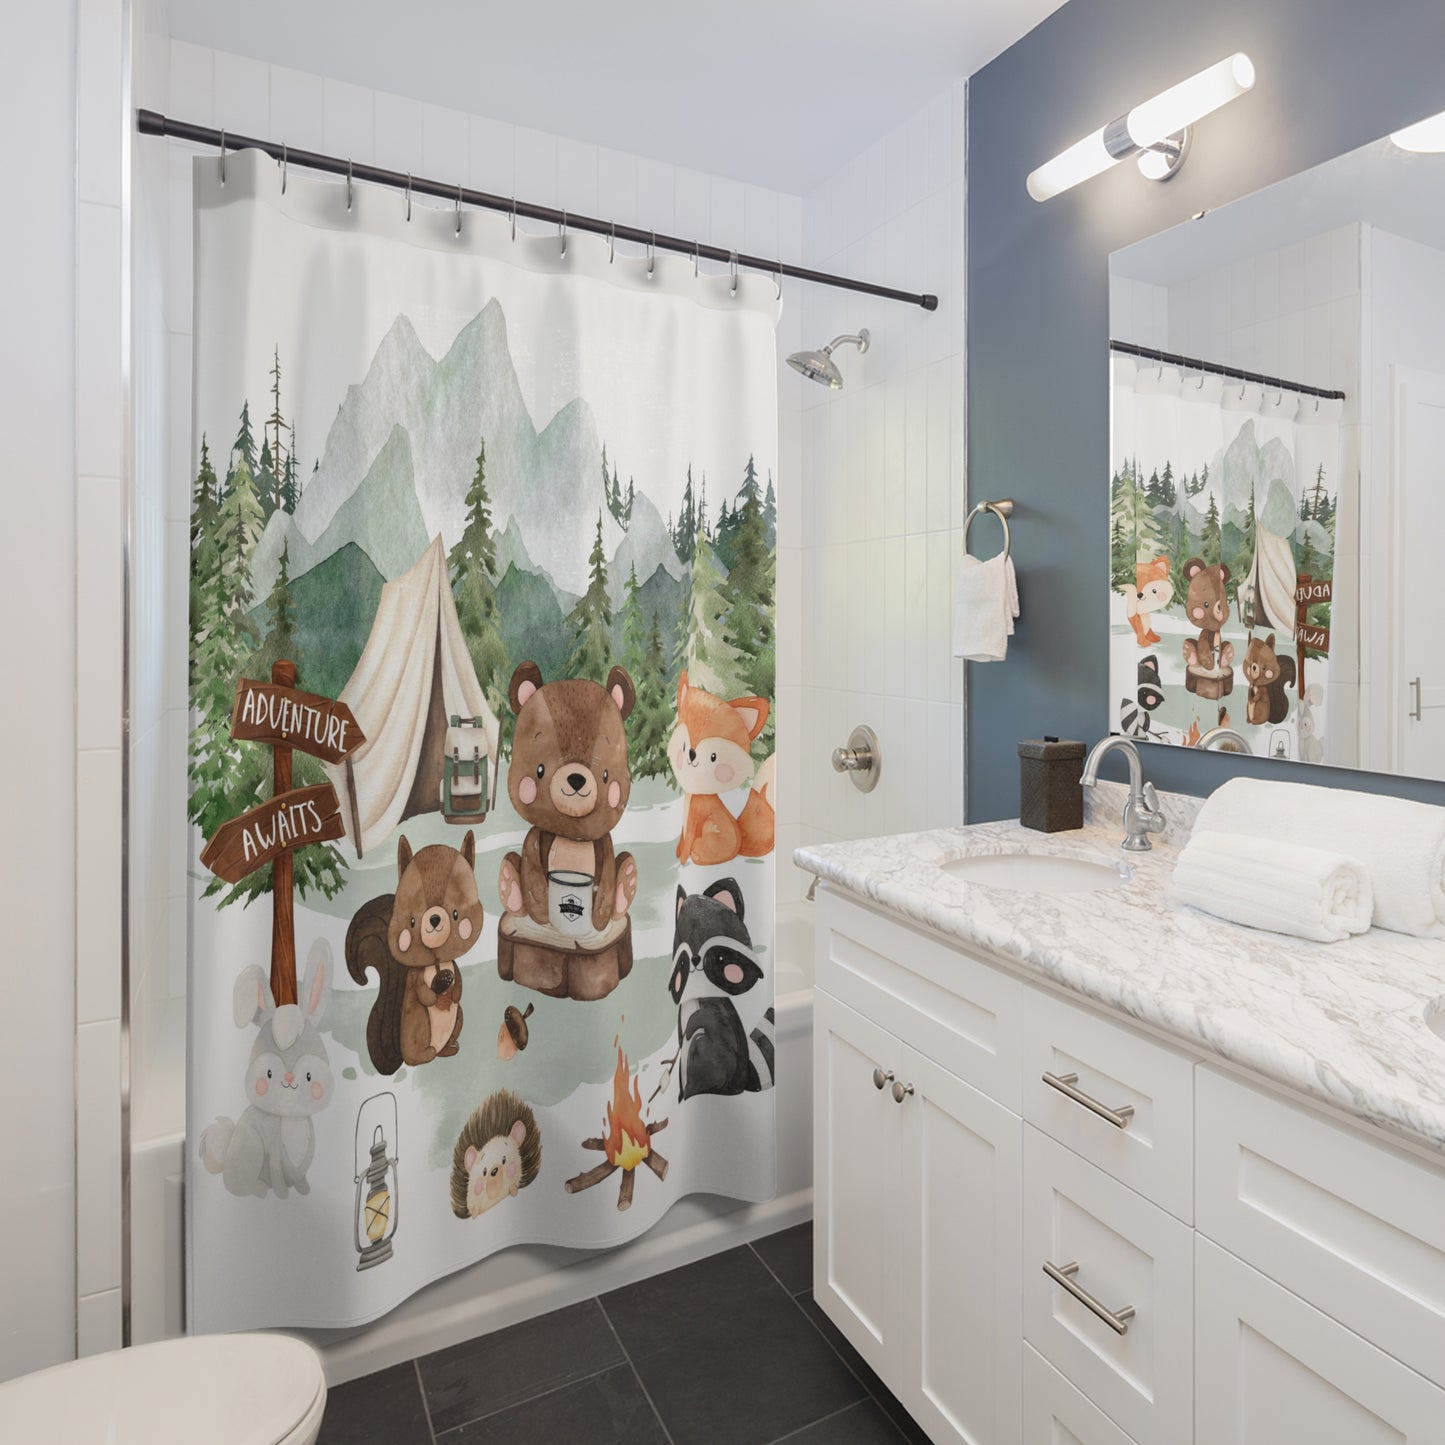 Woodland shower curtain, Forest bathroom decor - Camping Critters